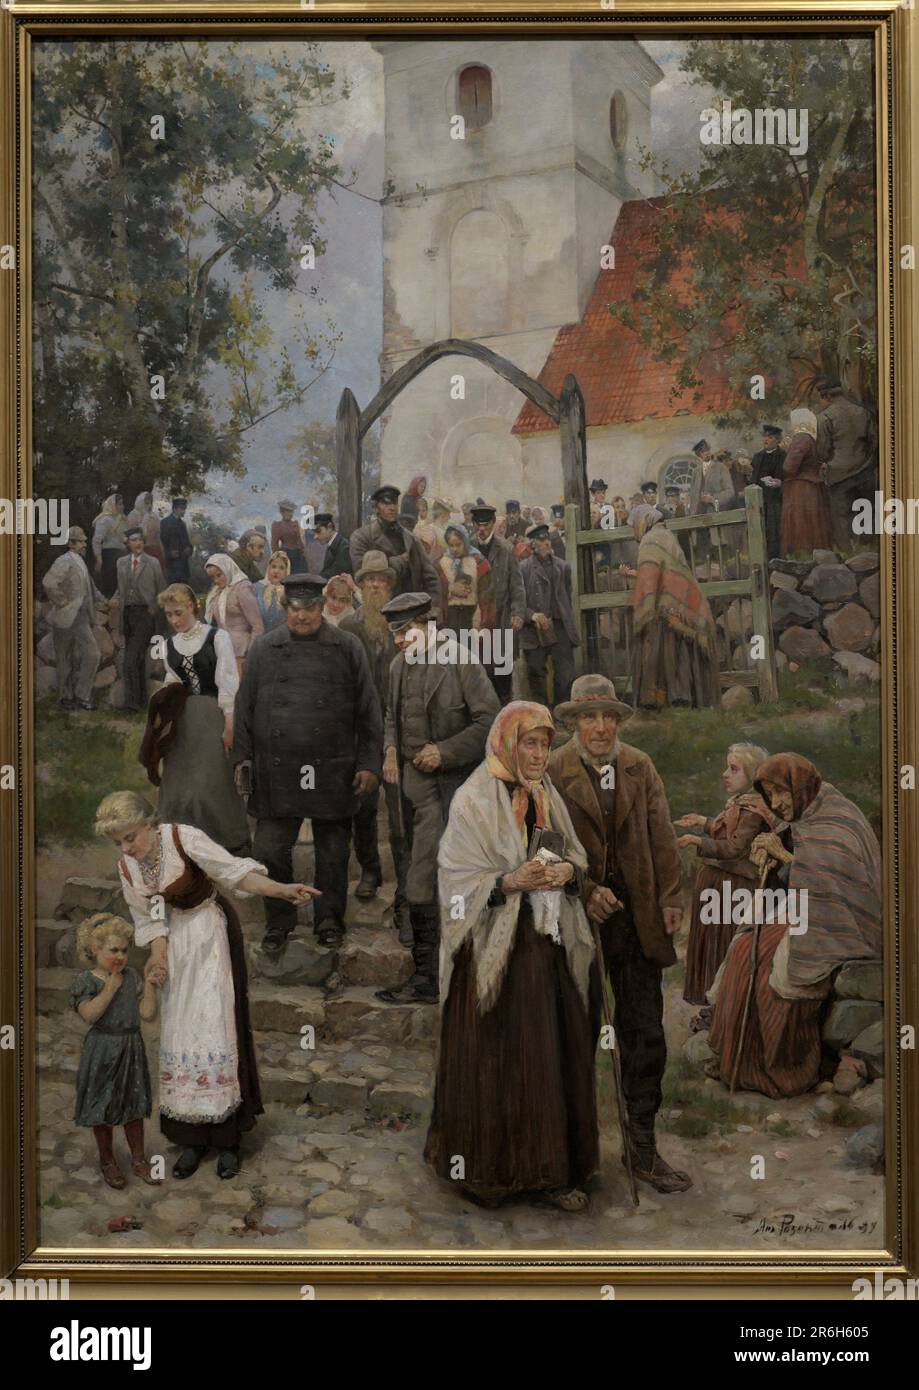 Janis Rozentals (1866-1916). Latvian painter. Coming from Church (After the Service), 1894. Oil on canvas (175 x 103 cm). Latvian National Museum of Art. Riga, Latvia. Stock Photo